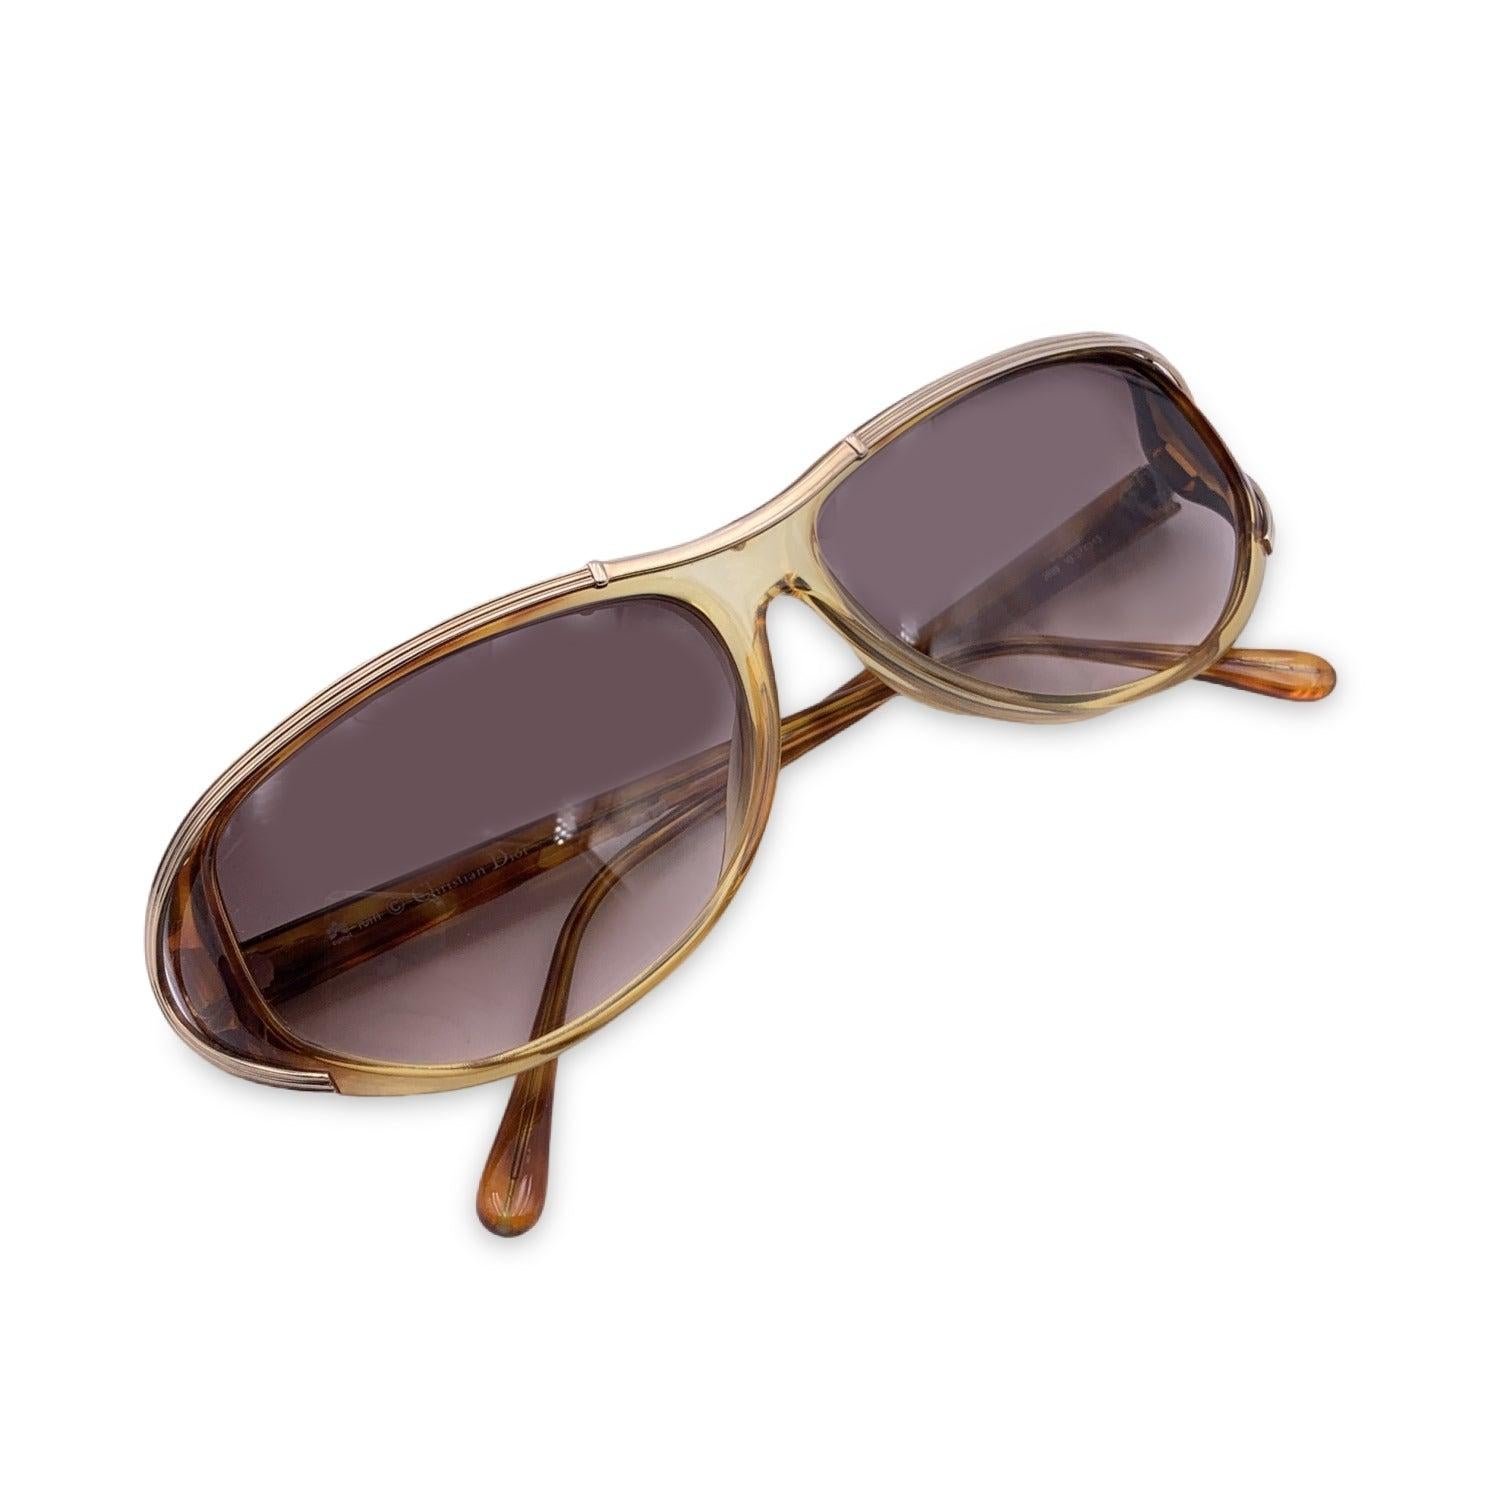 Vintage Christian Dior Women Sunglasses, Mod. 2699 10 Optyl. Size: 57/13 130mm. Beige acetate frame, with a gold detail on the upper frame. CD logo con temples . 100% Total UVA/UVB protection. Brown gradient lenses. Details MATERIAL: Plastic COLOR: